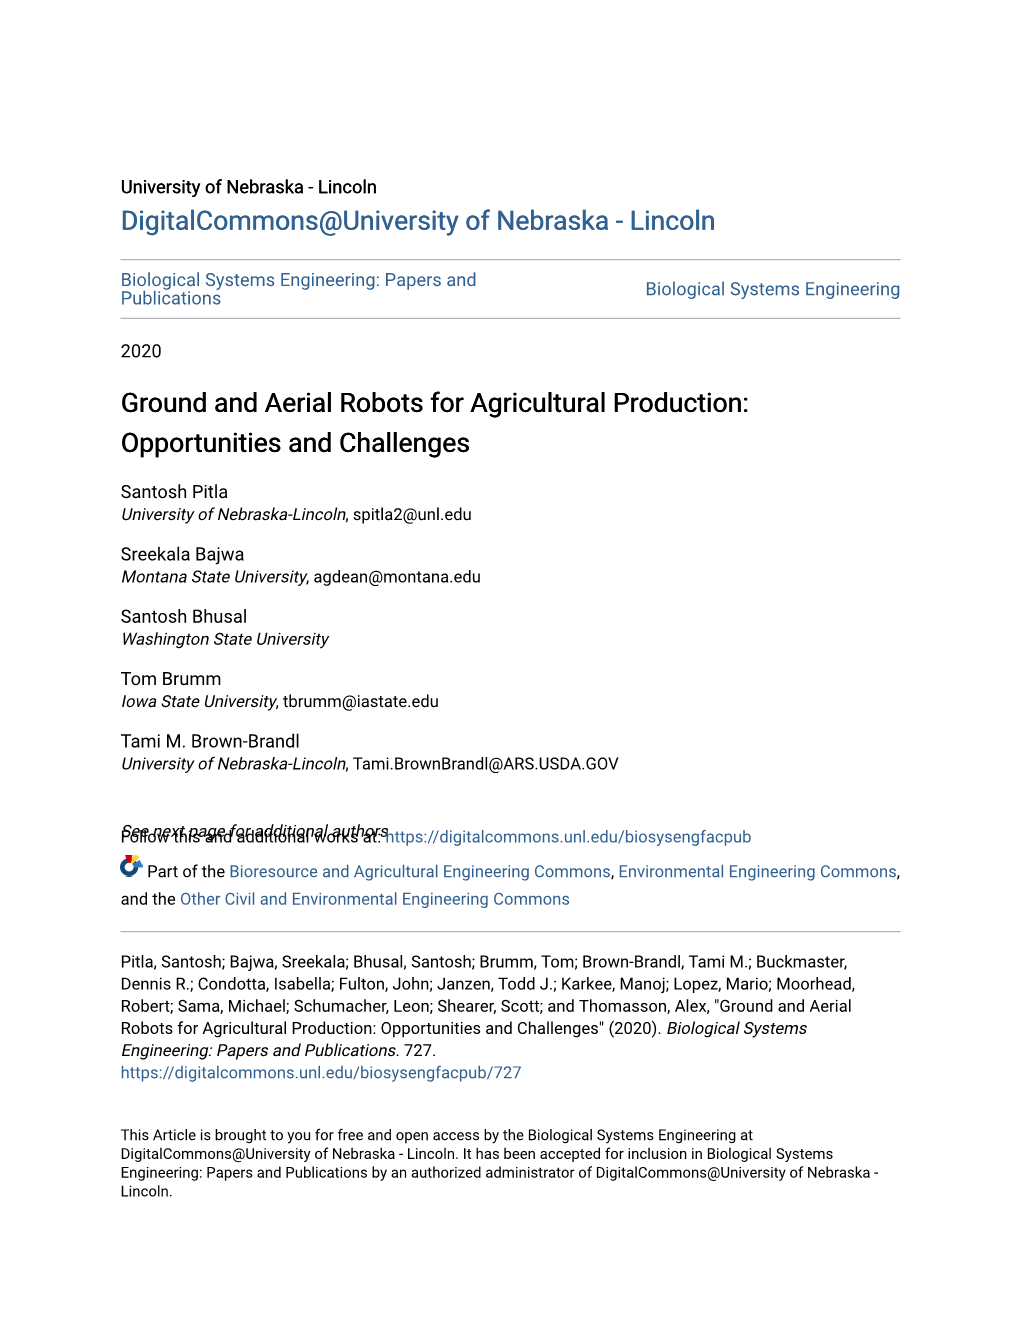 Ground and Aerial Robots for Agricultural Production: Opportunities and Challenges